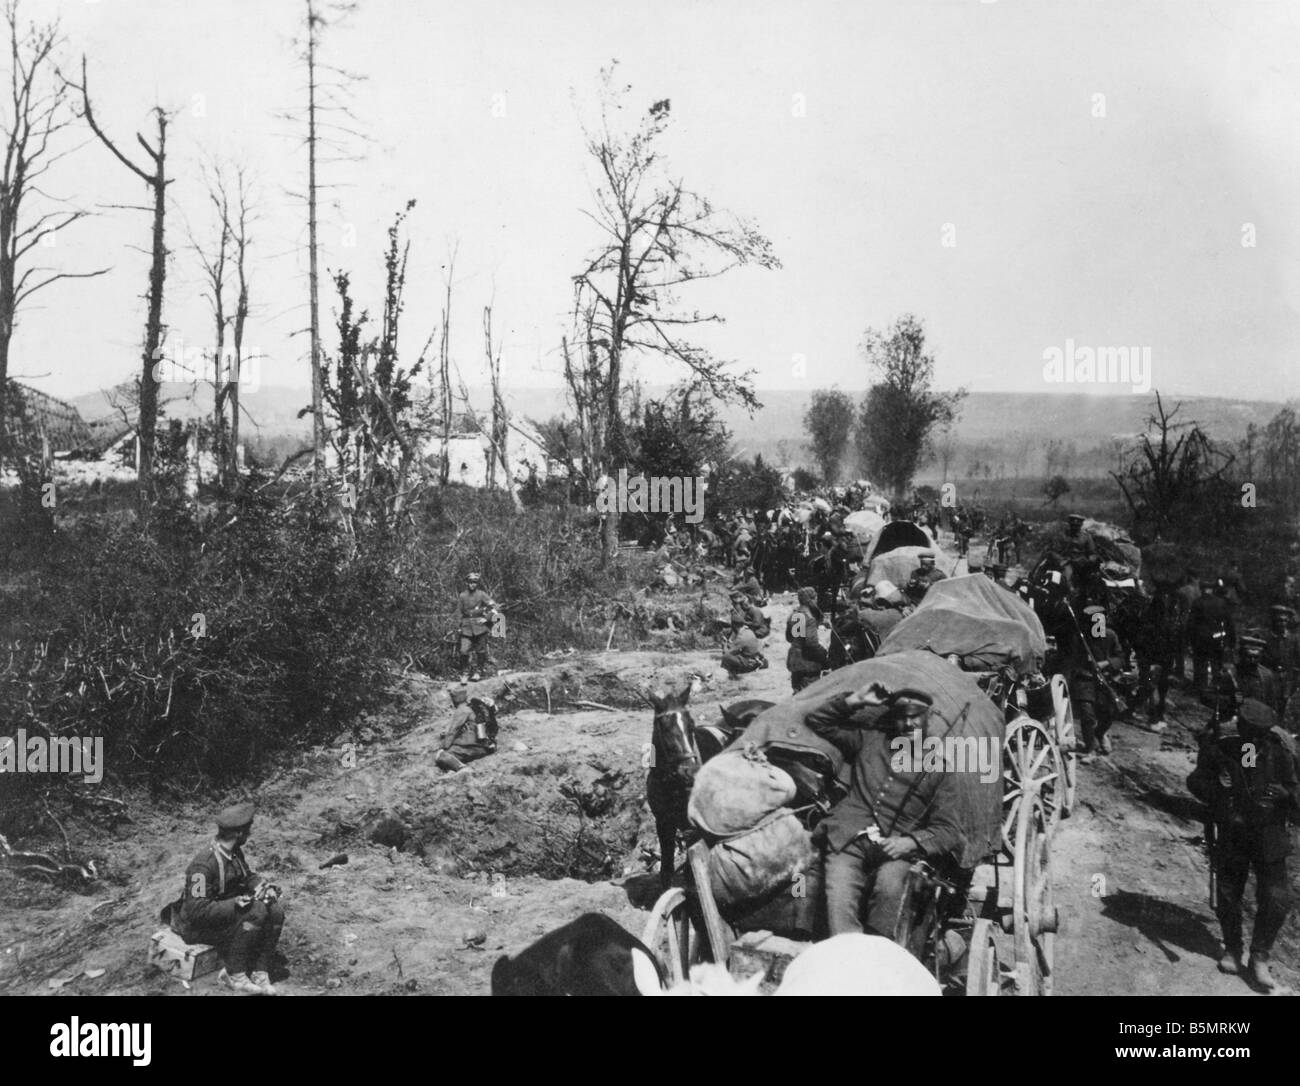 WW1 West Fr Ger troops on addvance World War 1 Western Front German major offensive March July 1918 German troops advance Photo Stock Photo